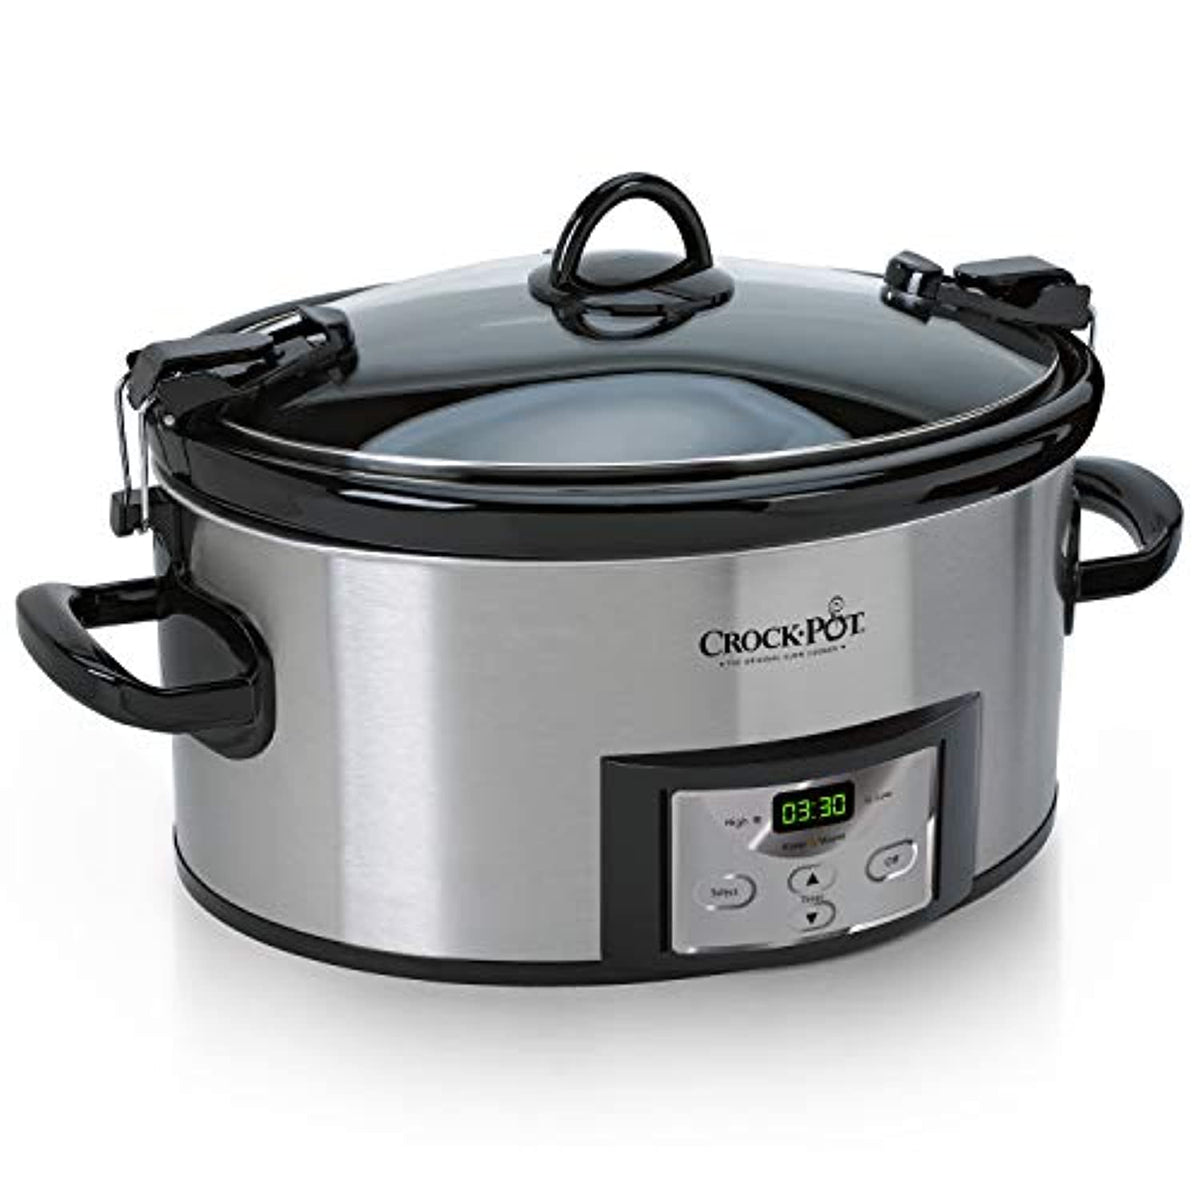 Eco-Friendly Stainless Steel Slow Cooker